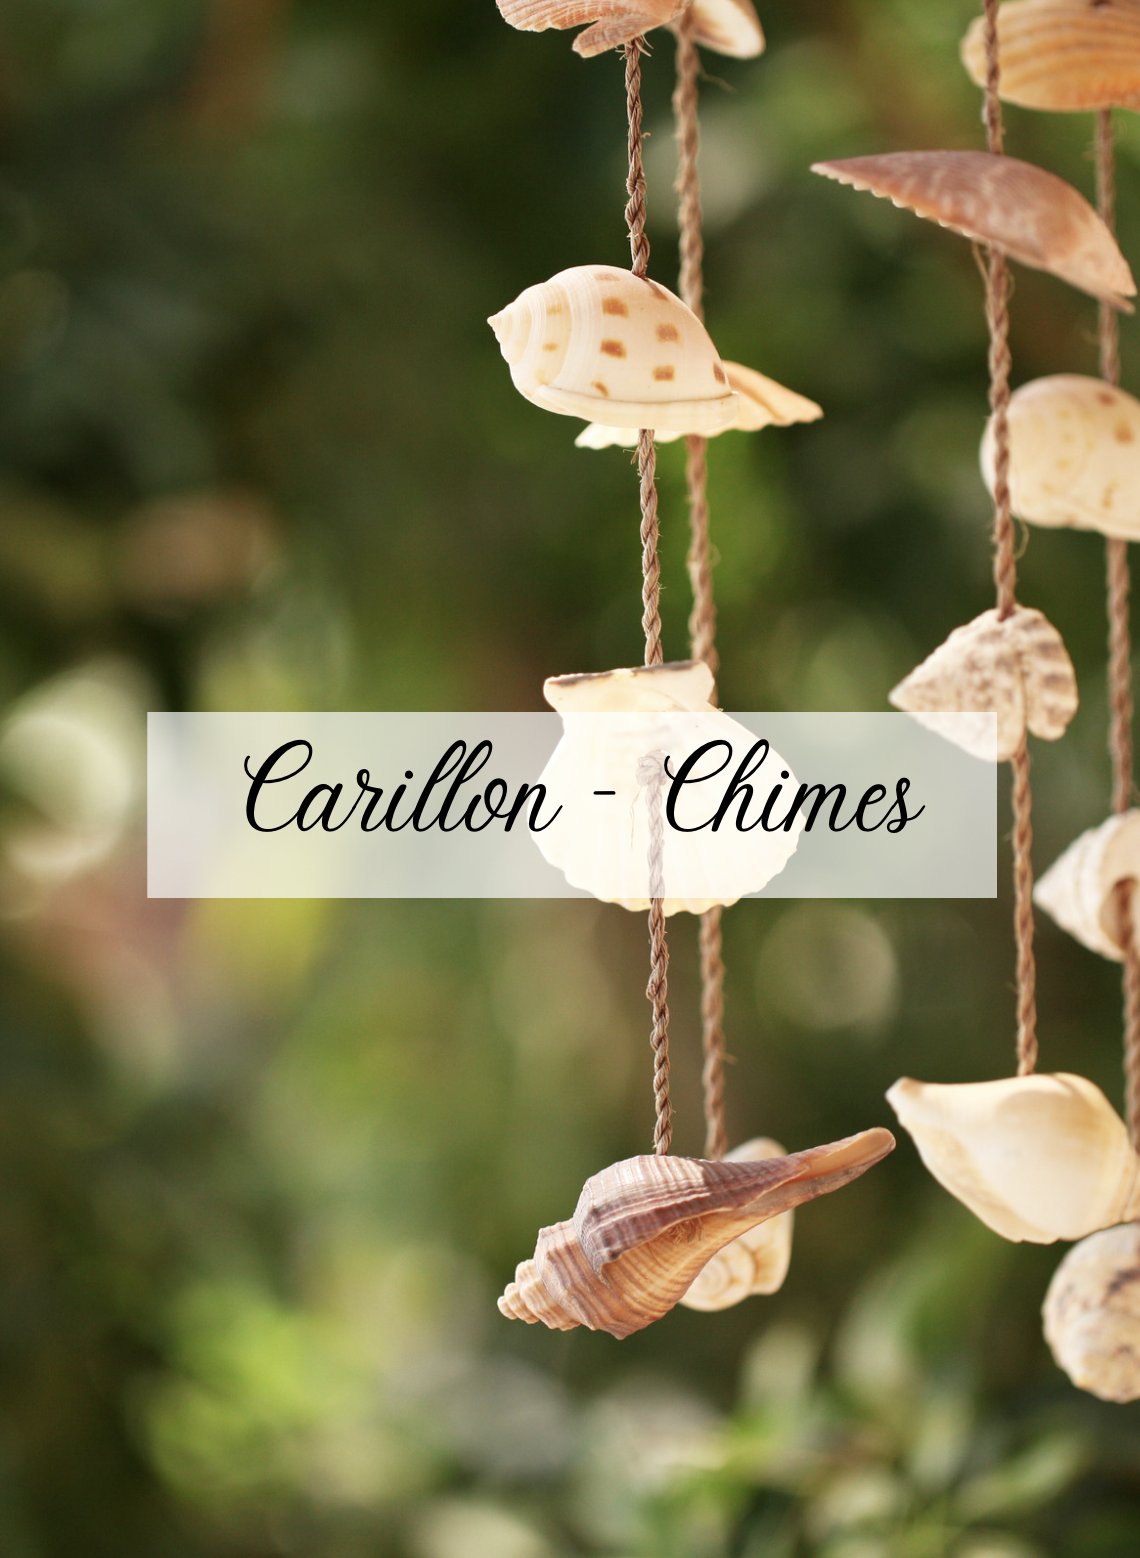 Carillons & Chimes